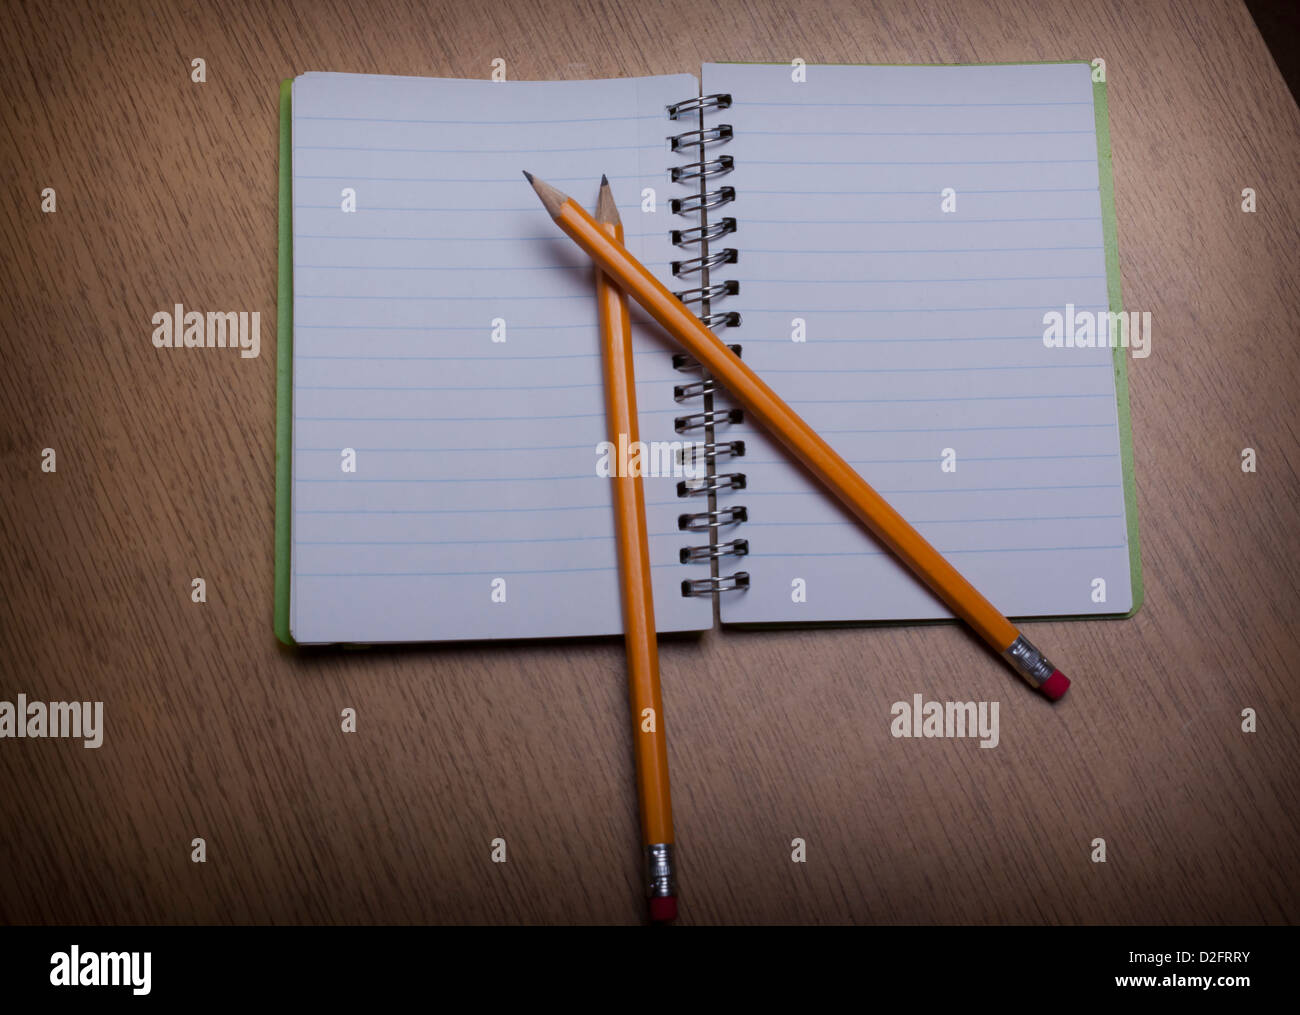 open notebook on a wooden desk with pencil Stock Photo